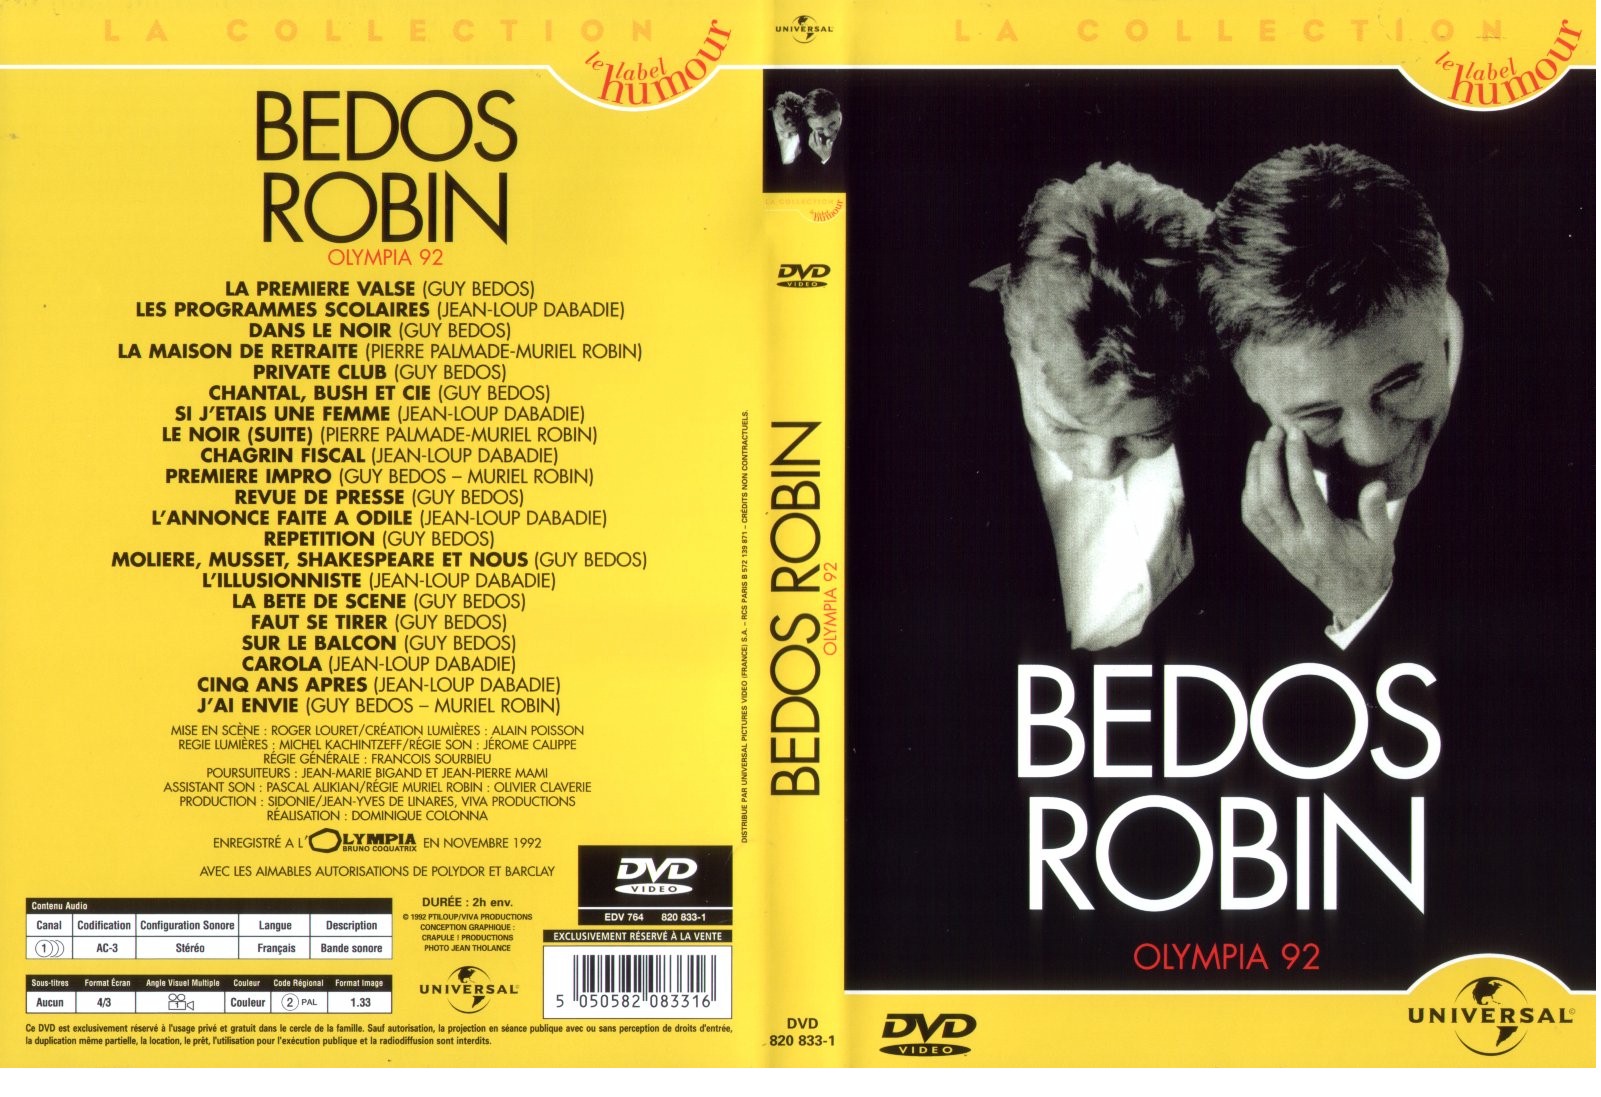 Jaquette DVD Bedos Robin Olympia 92